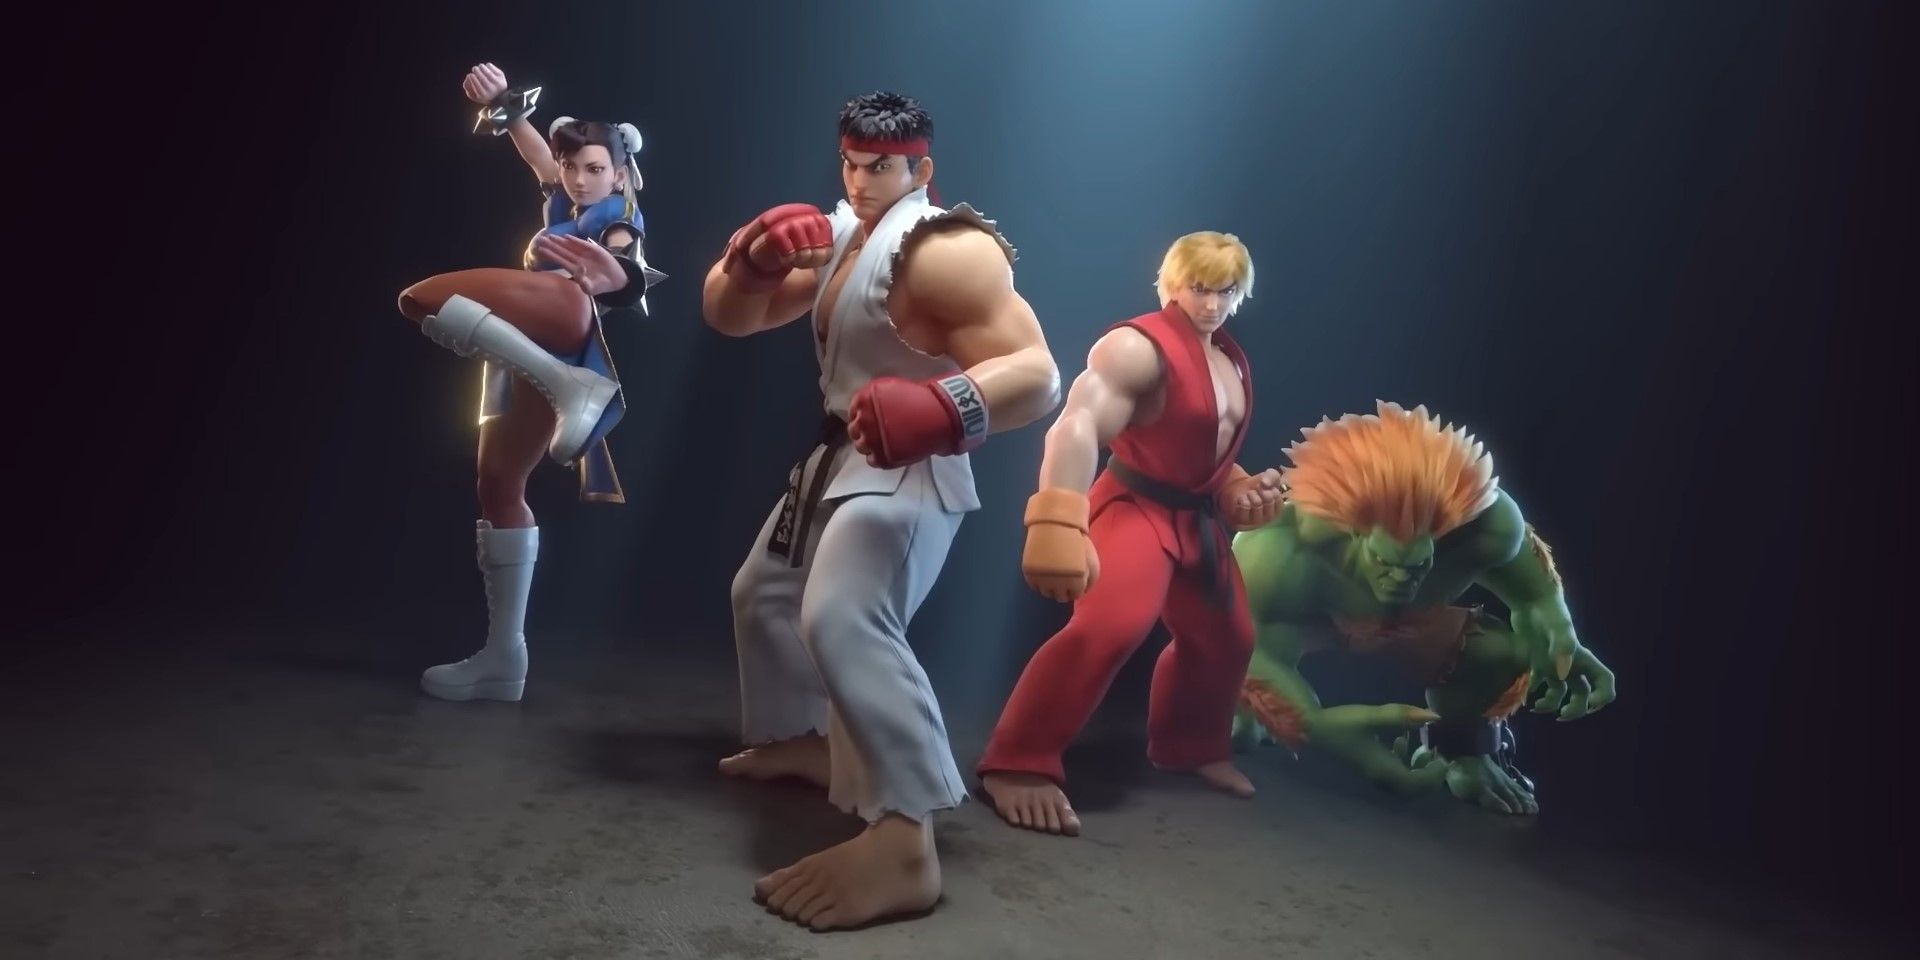 From left to right: Chun Li, Ryu, Ken and Blanka from Street Fighter Duel posing.